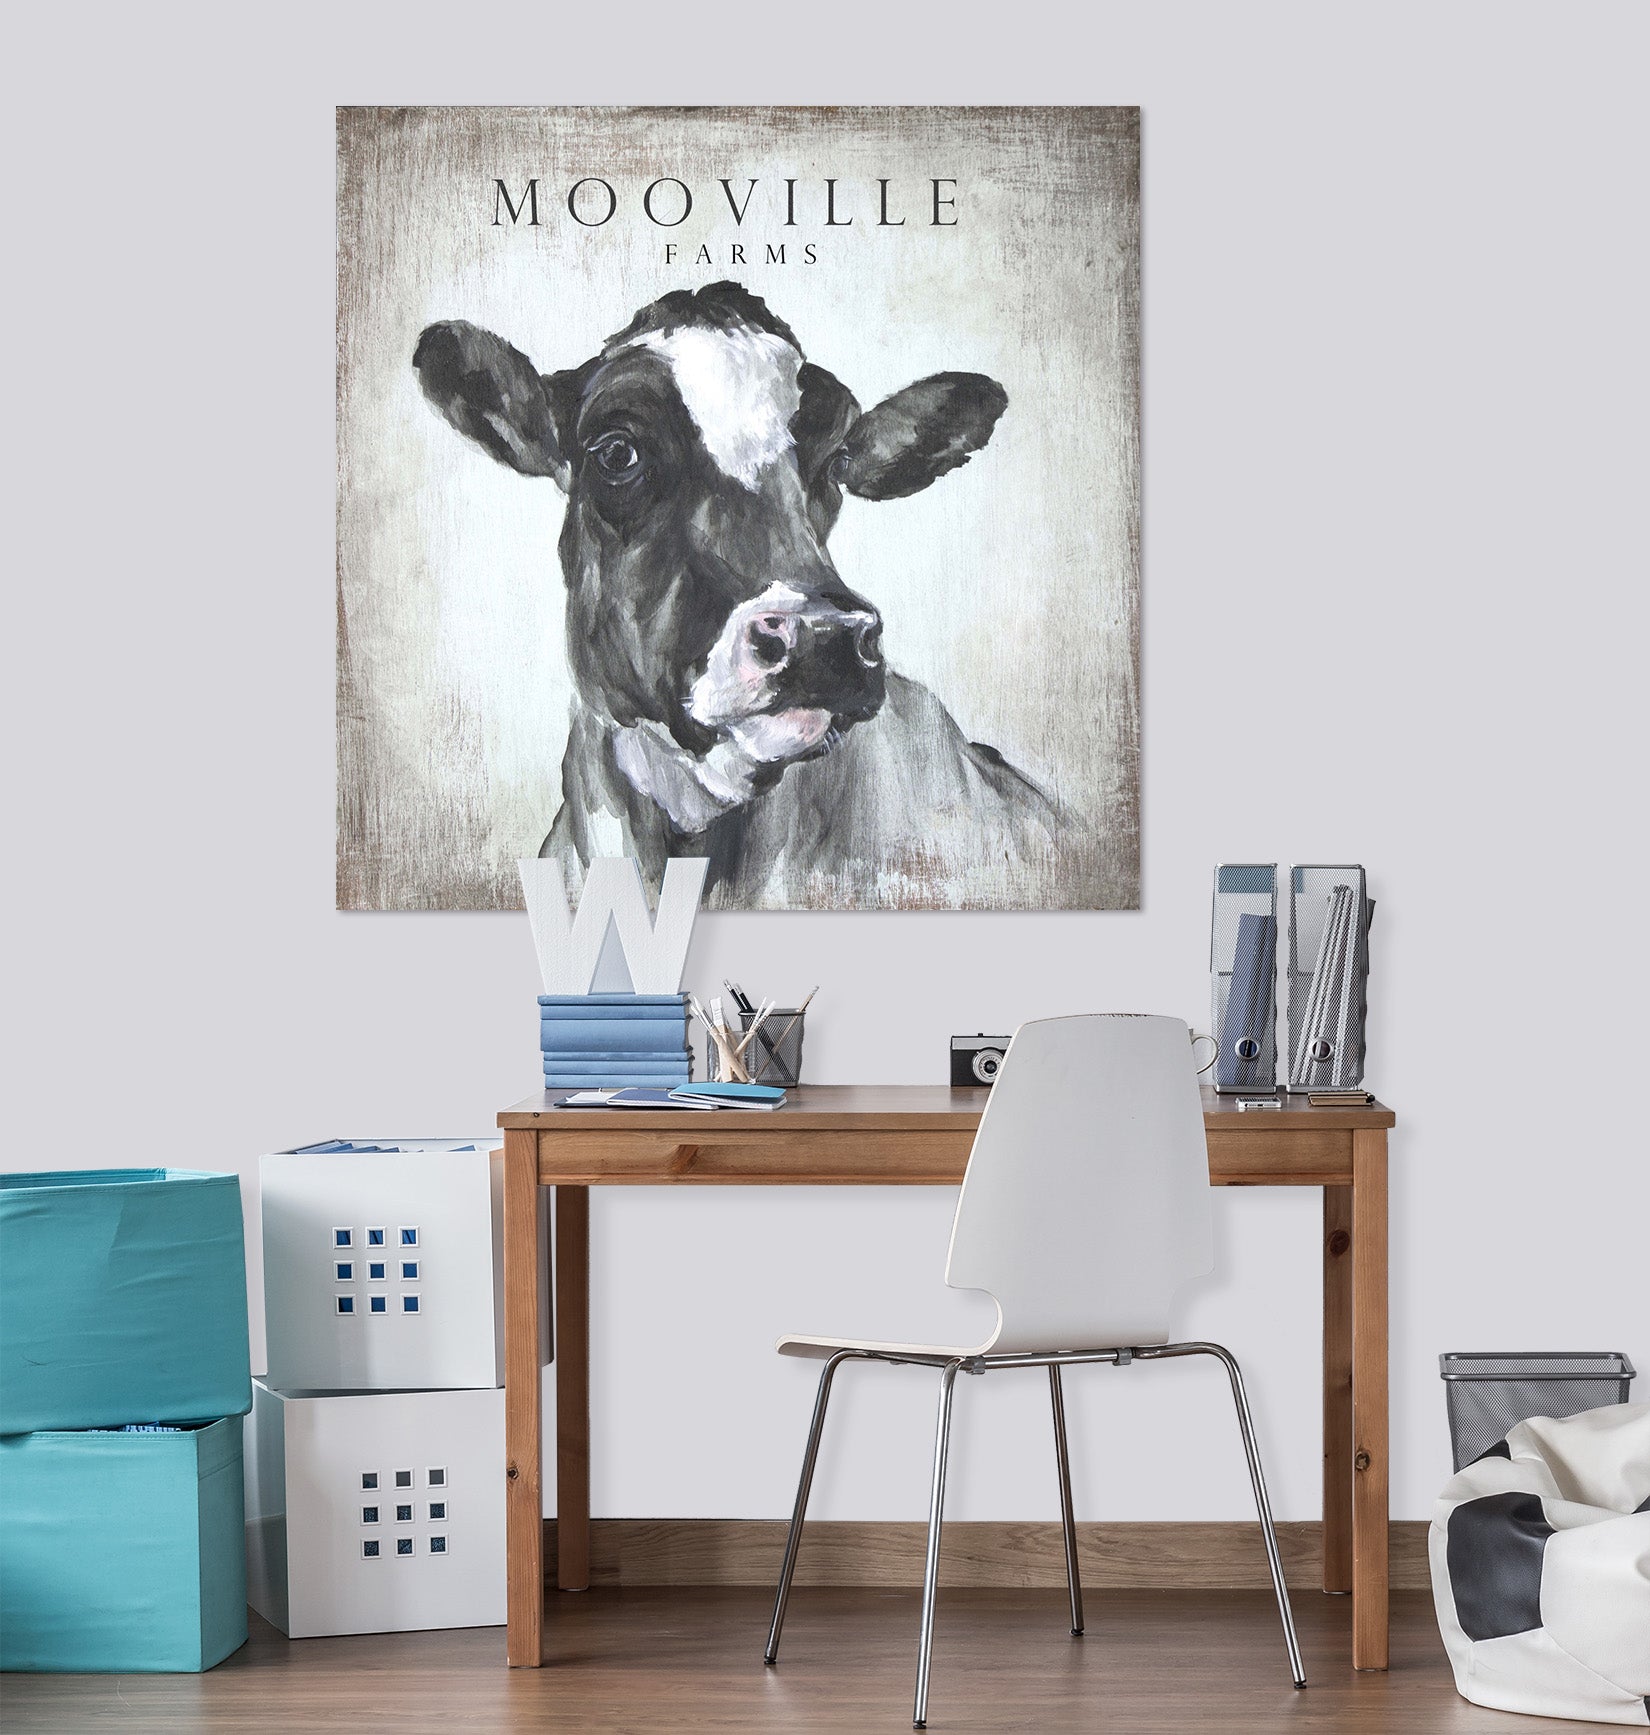 3D Sketch Cow 009 Debi Coules Wall Sticker